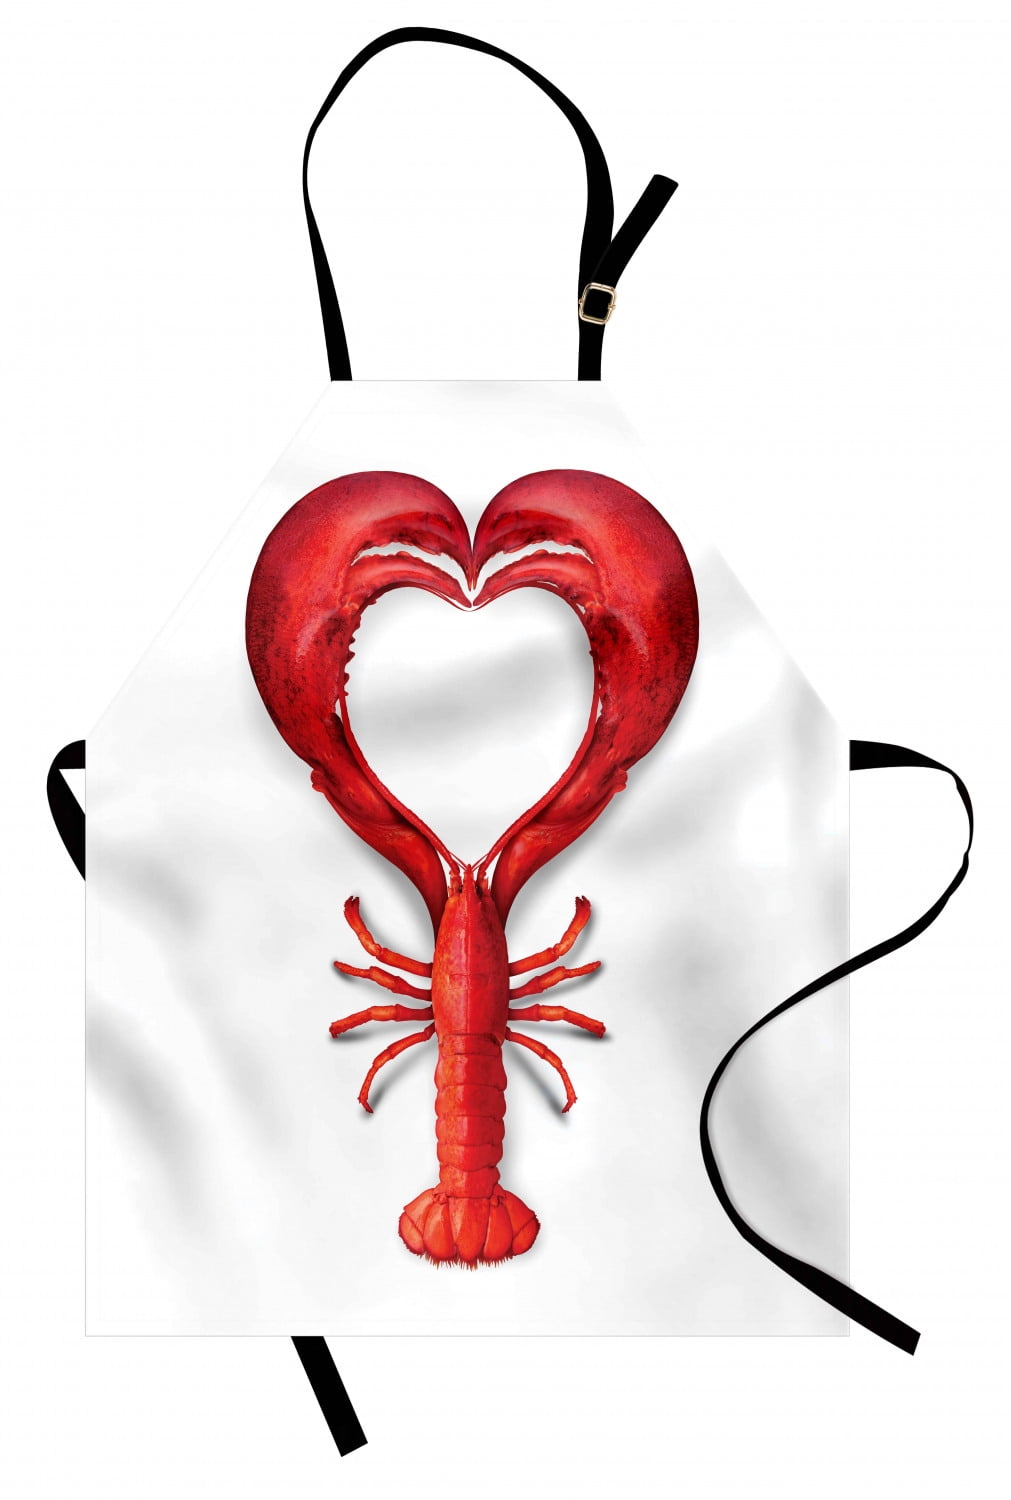 Kitchen Apron-Lobster Half Apron-Cooking Apron in Retro Look 